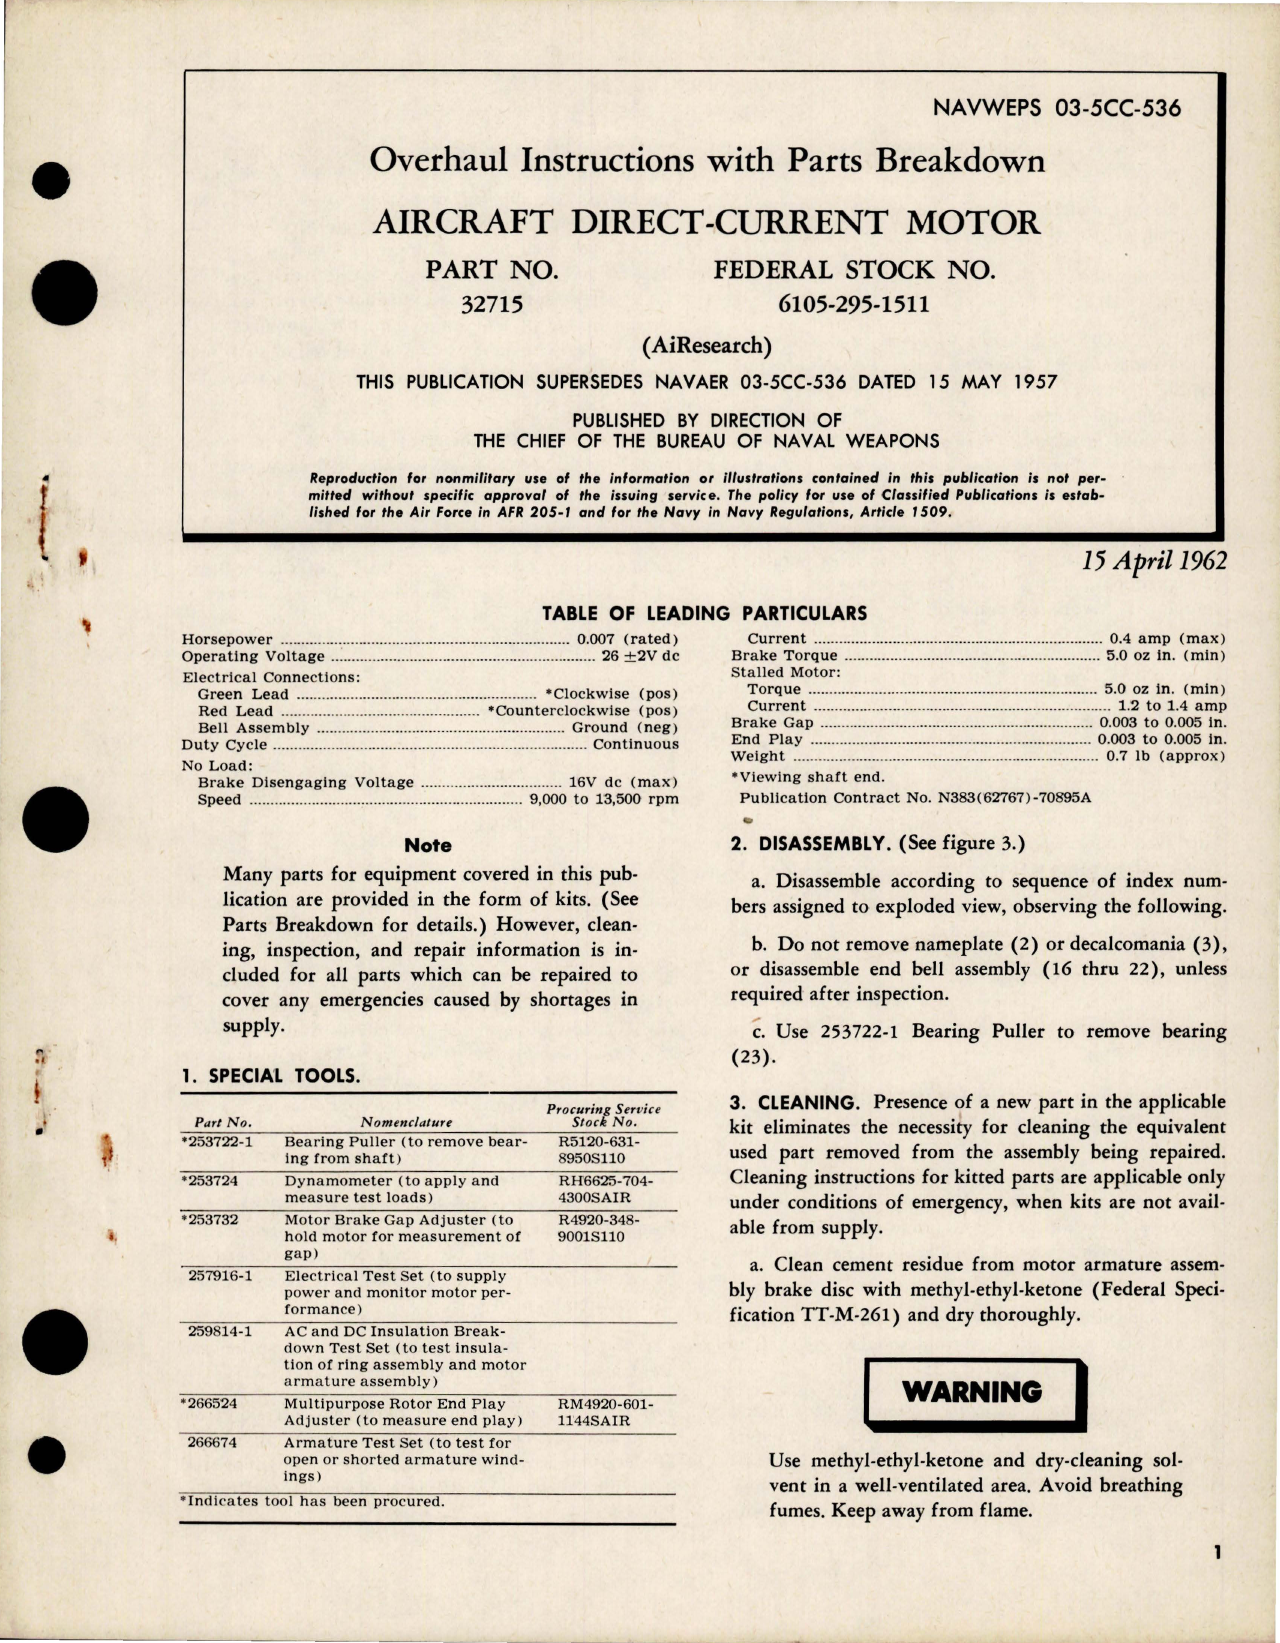 Sample page 1 from AirCorps Library document: Overhaul Instructions with Parts for Direct Current Motor - Part 32715 - Stock 6105-295-1511 